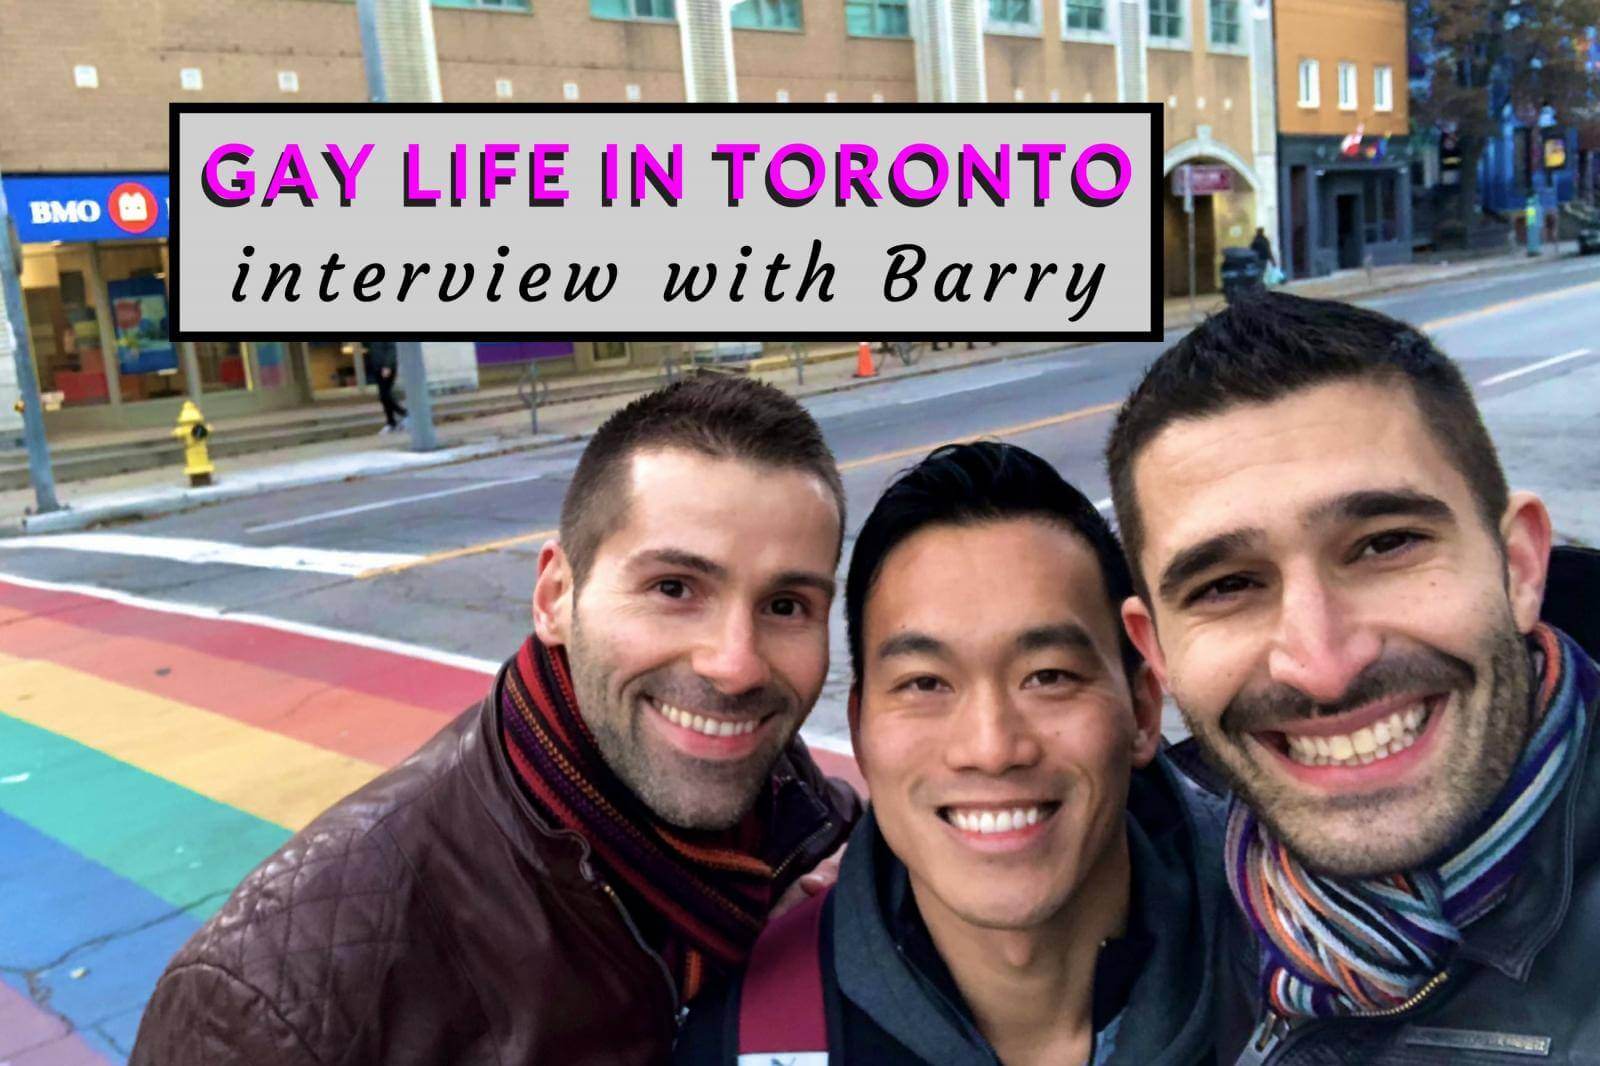 NOMADIC BOYS – Gay life in Toronto: interview with local boy Barry from Toronto